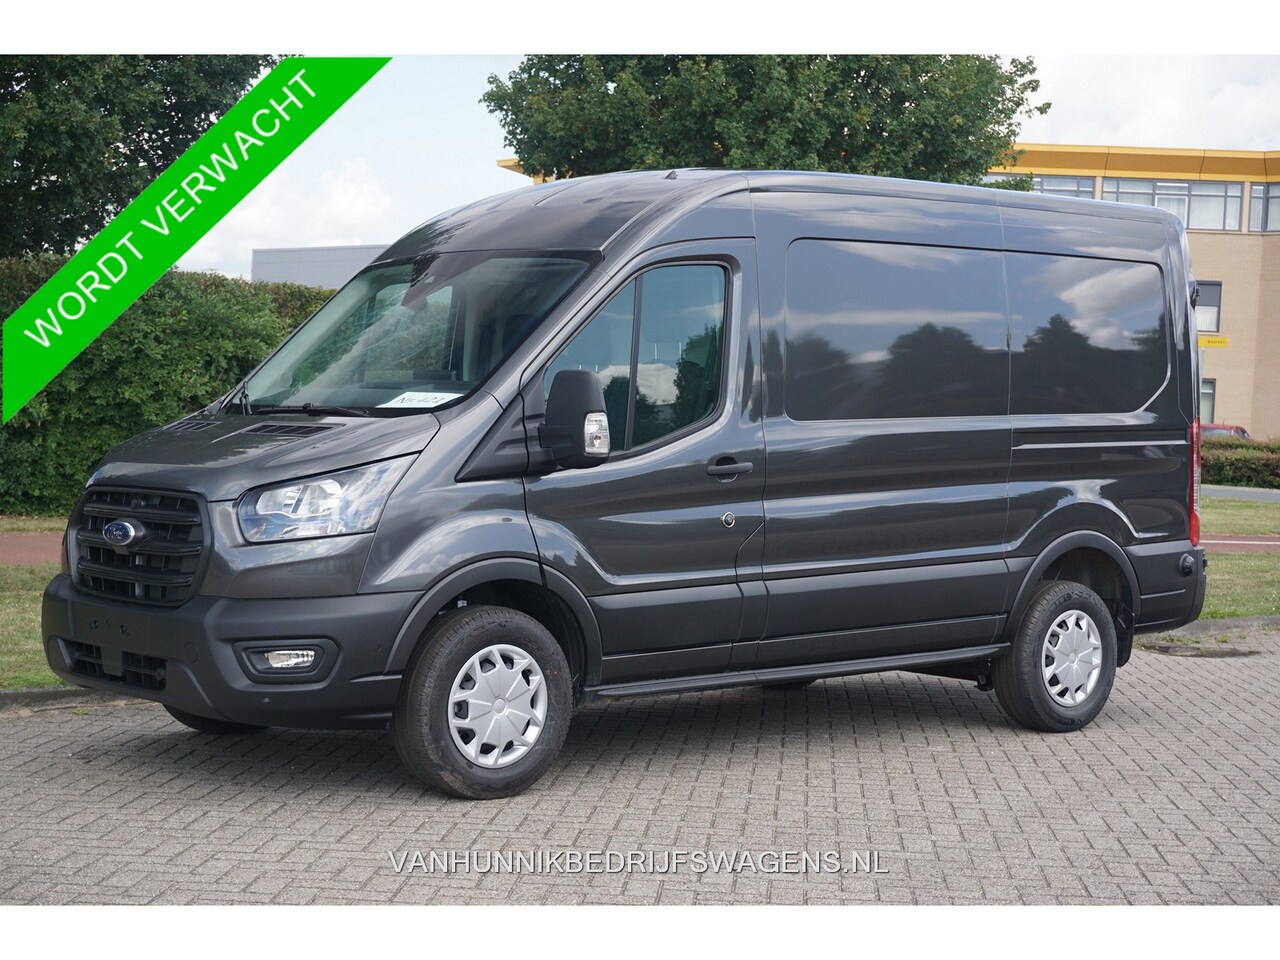 Ford Transit - 350M 130PK L2H2 Climate, 12" Sync 4 met Apple CP/Android A, Trekhaak!! NR. N09* - AutoWereld.nl